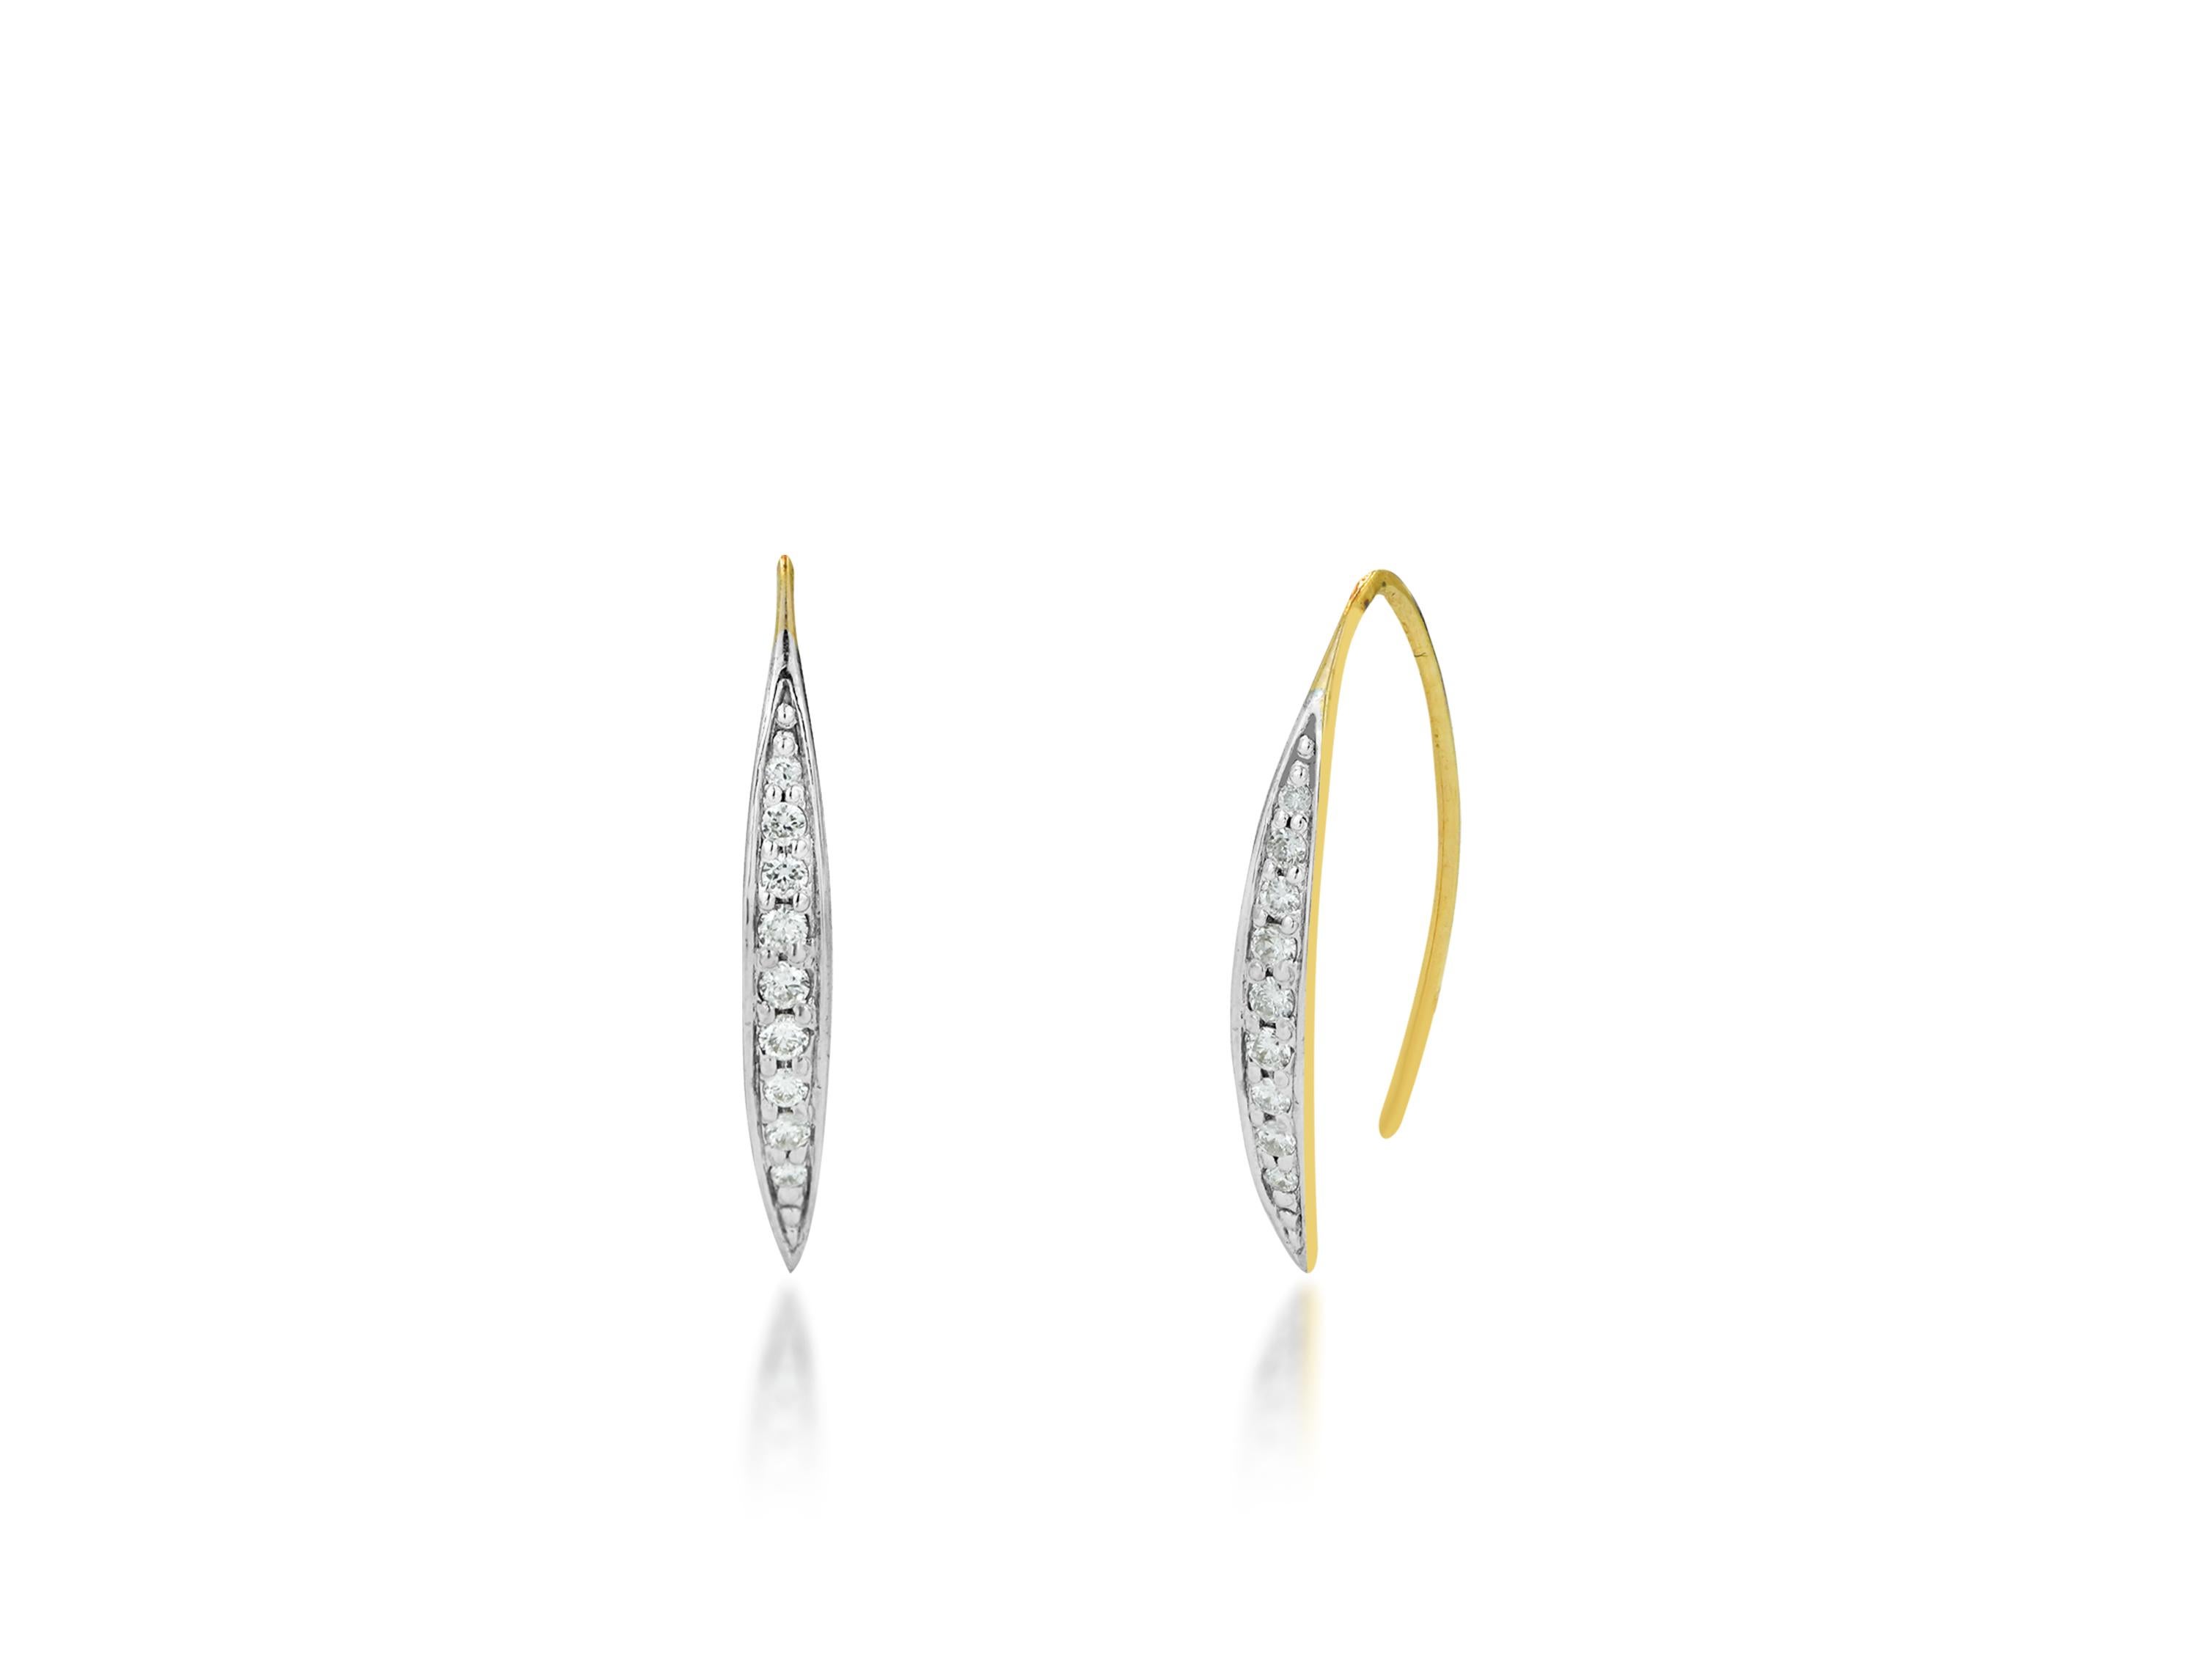 Diamond U Threader Earrings 18k Gold Threader Earrings Diamond Wire Hoop Earring Pave Diamond Hook Earring

This Pair of Dainty Earrings are made of solid 18k gold featuring shiny brilliant round cut natural diamonds set by master setter in our